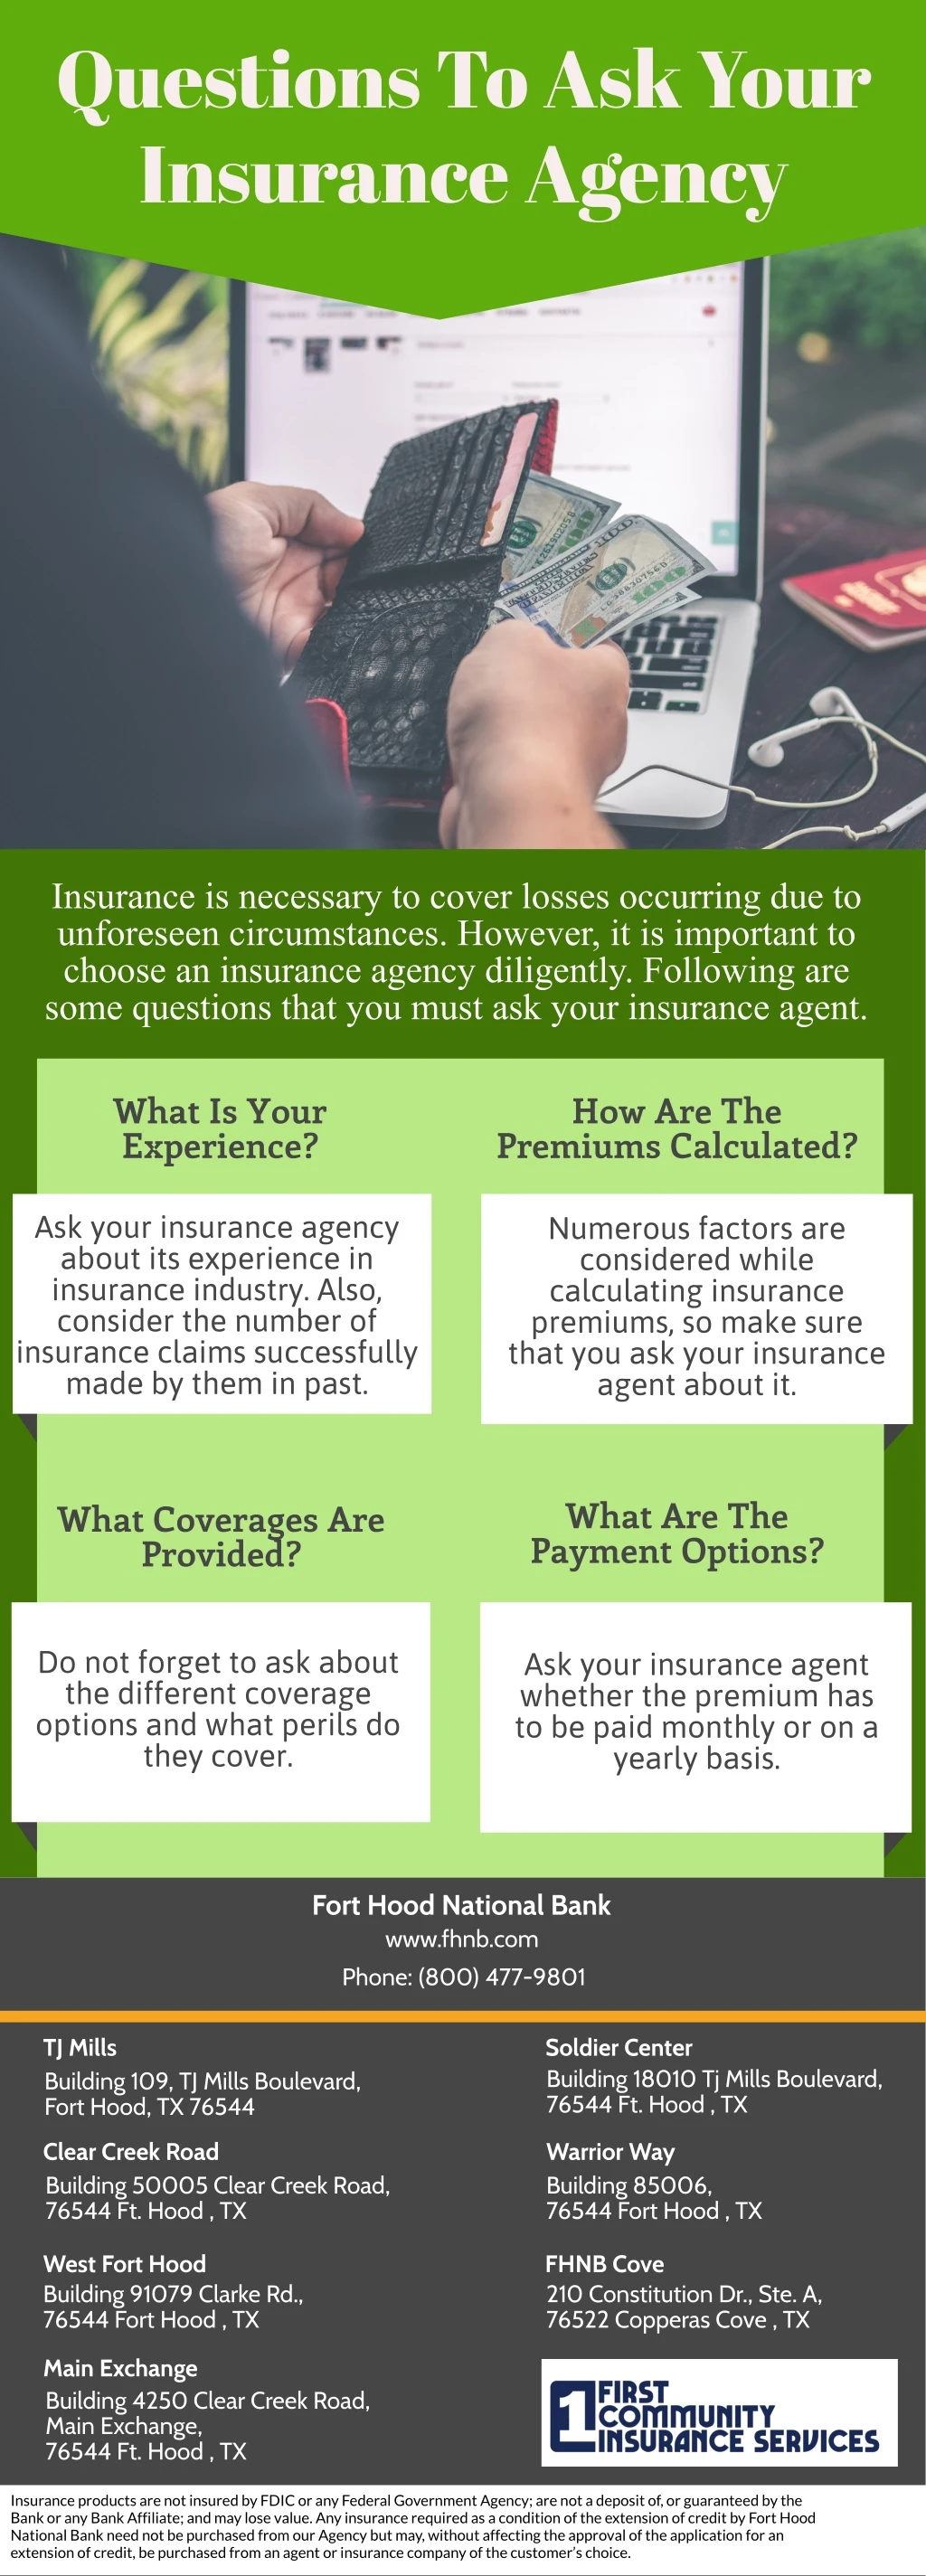 questions to ask your insurance agency